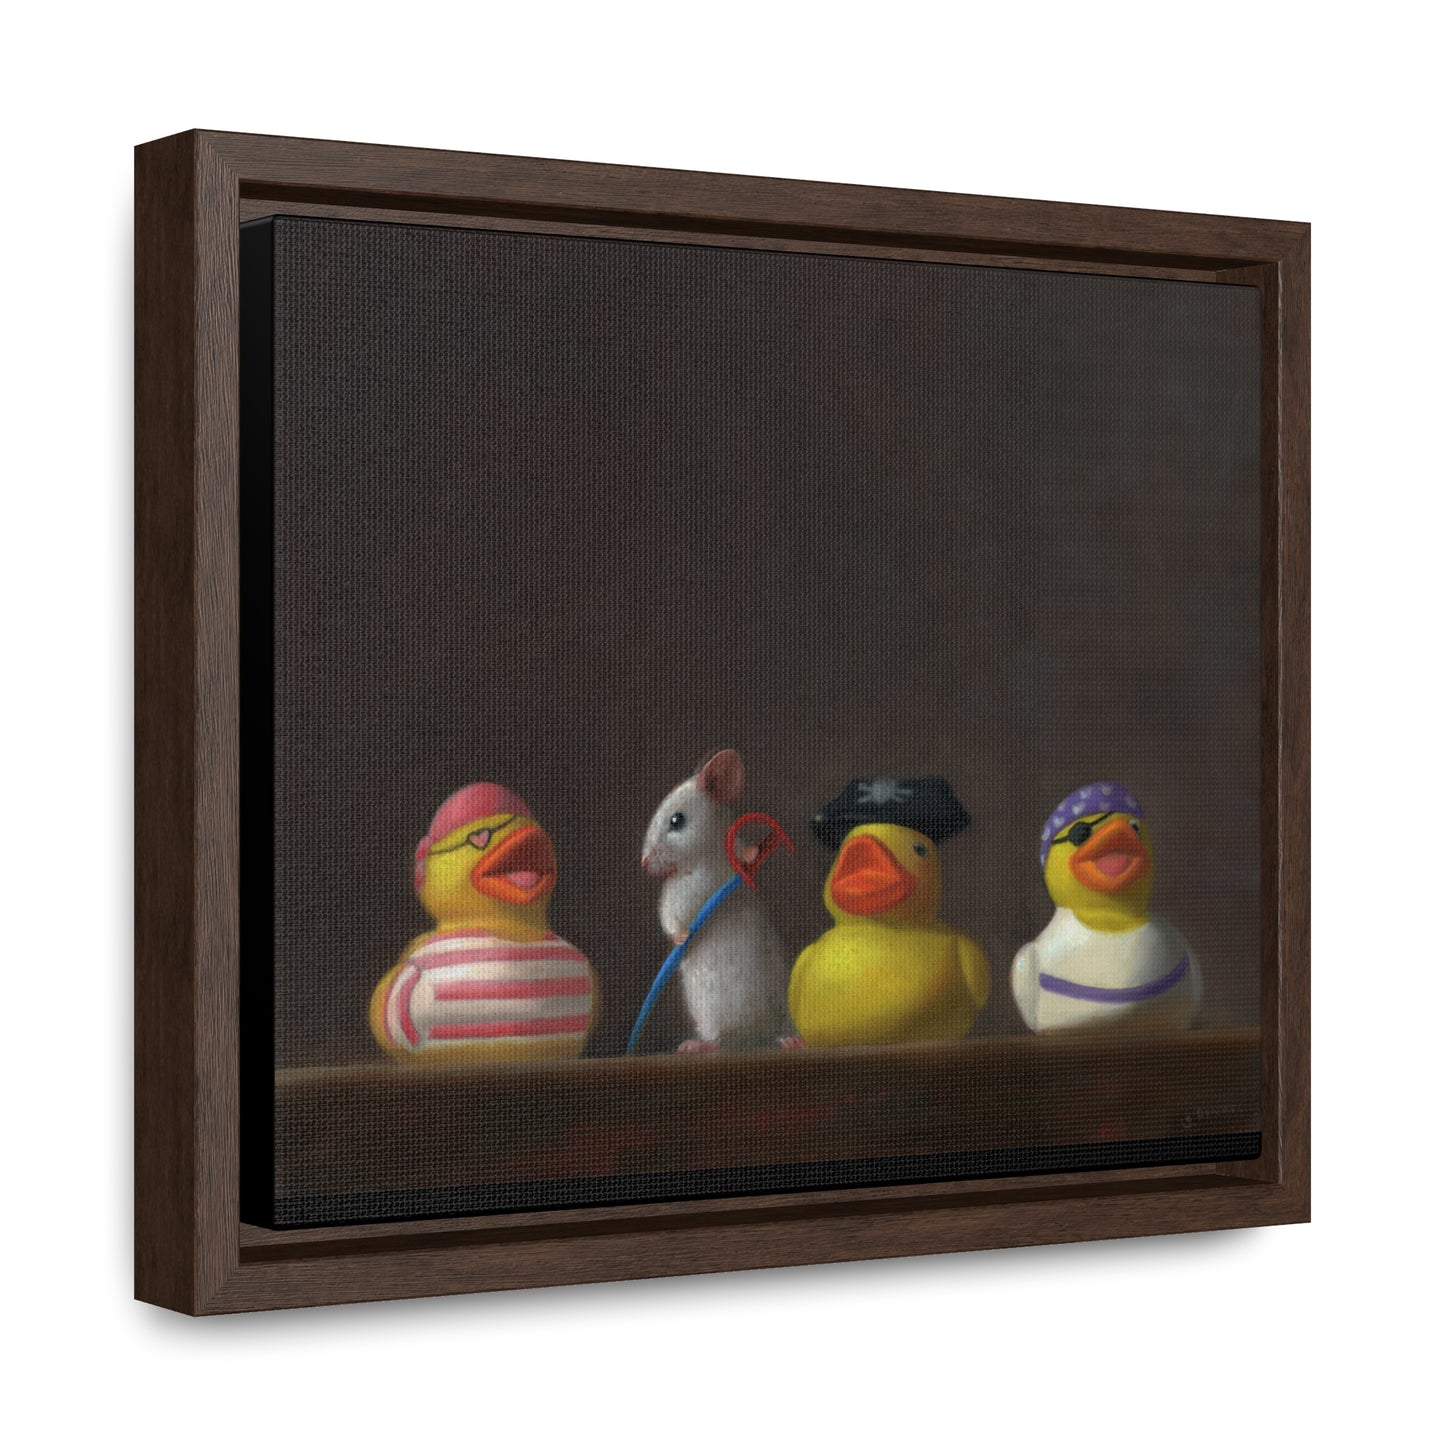 Gallery Framed Canvas - Stuart Dunkel: "Family Portrait: It's a Pirates Life" - Framed Canvas Reproduction